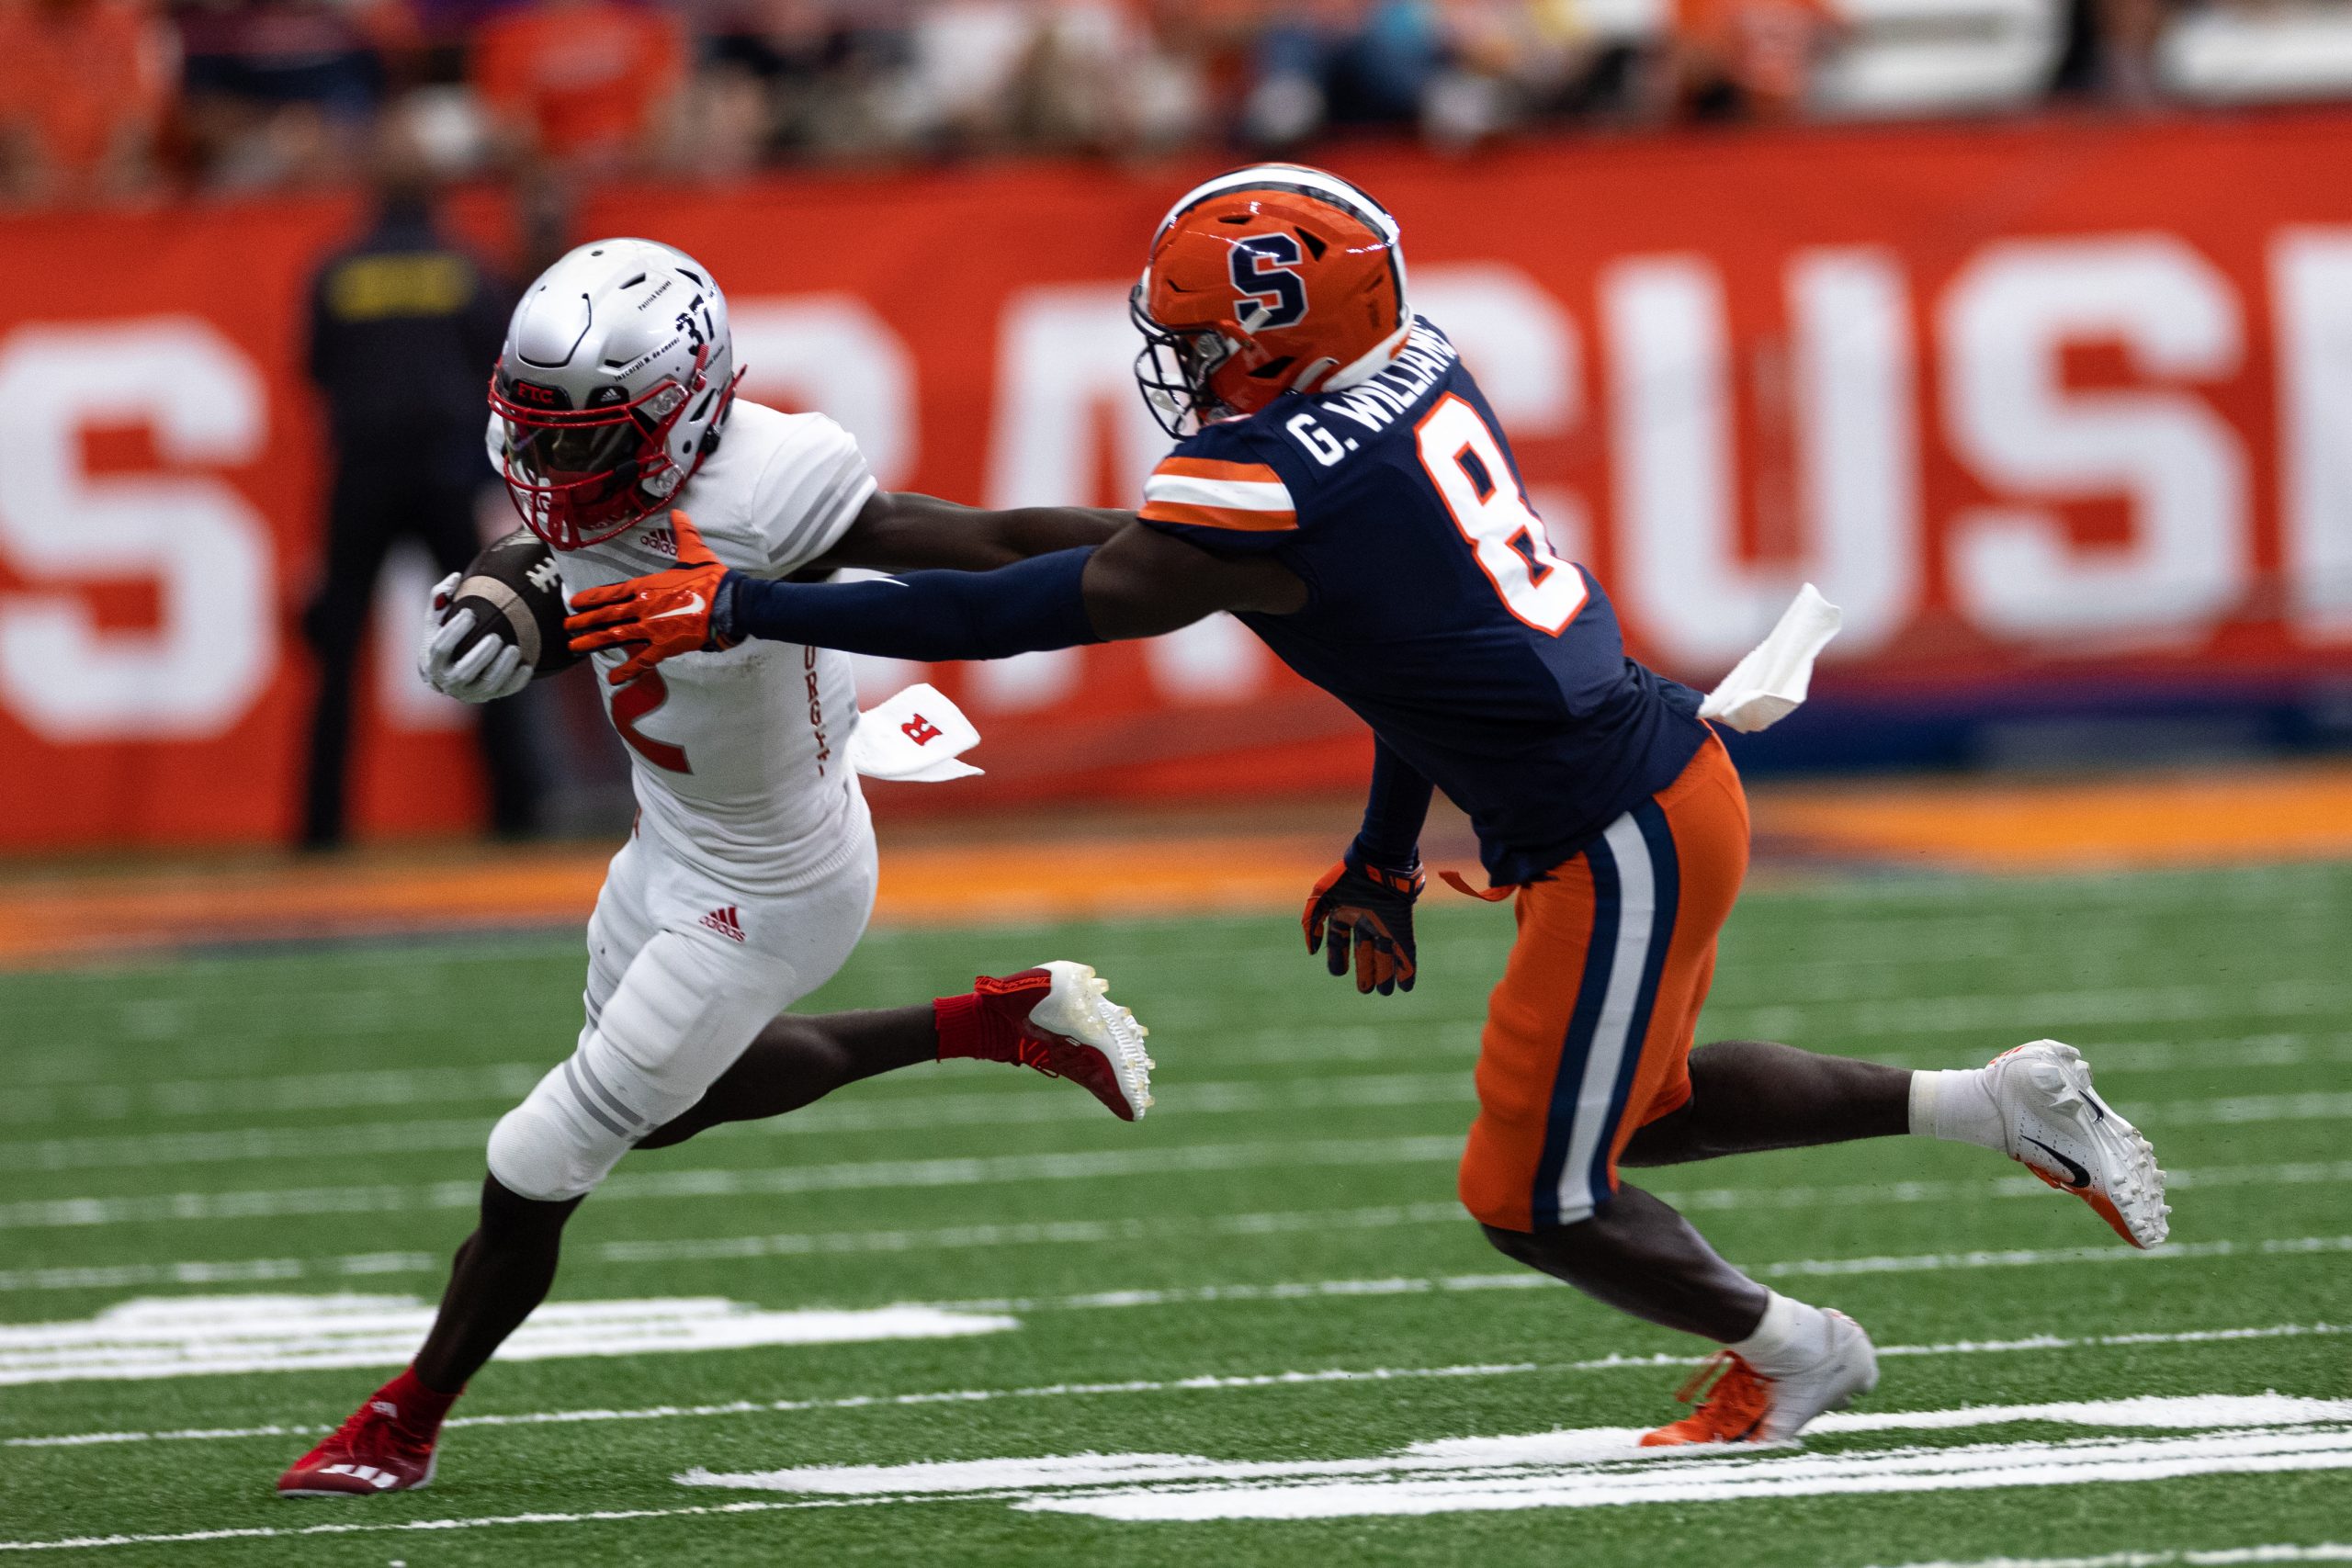 Syracuse’s Garrett Williams (8) tries to wrap up Rutgers’ Aron Cruickshank after he made a catch during an NCAA football game, Saturday, at the Carrier Dome.